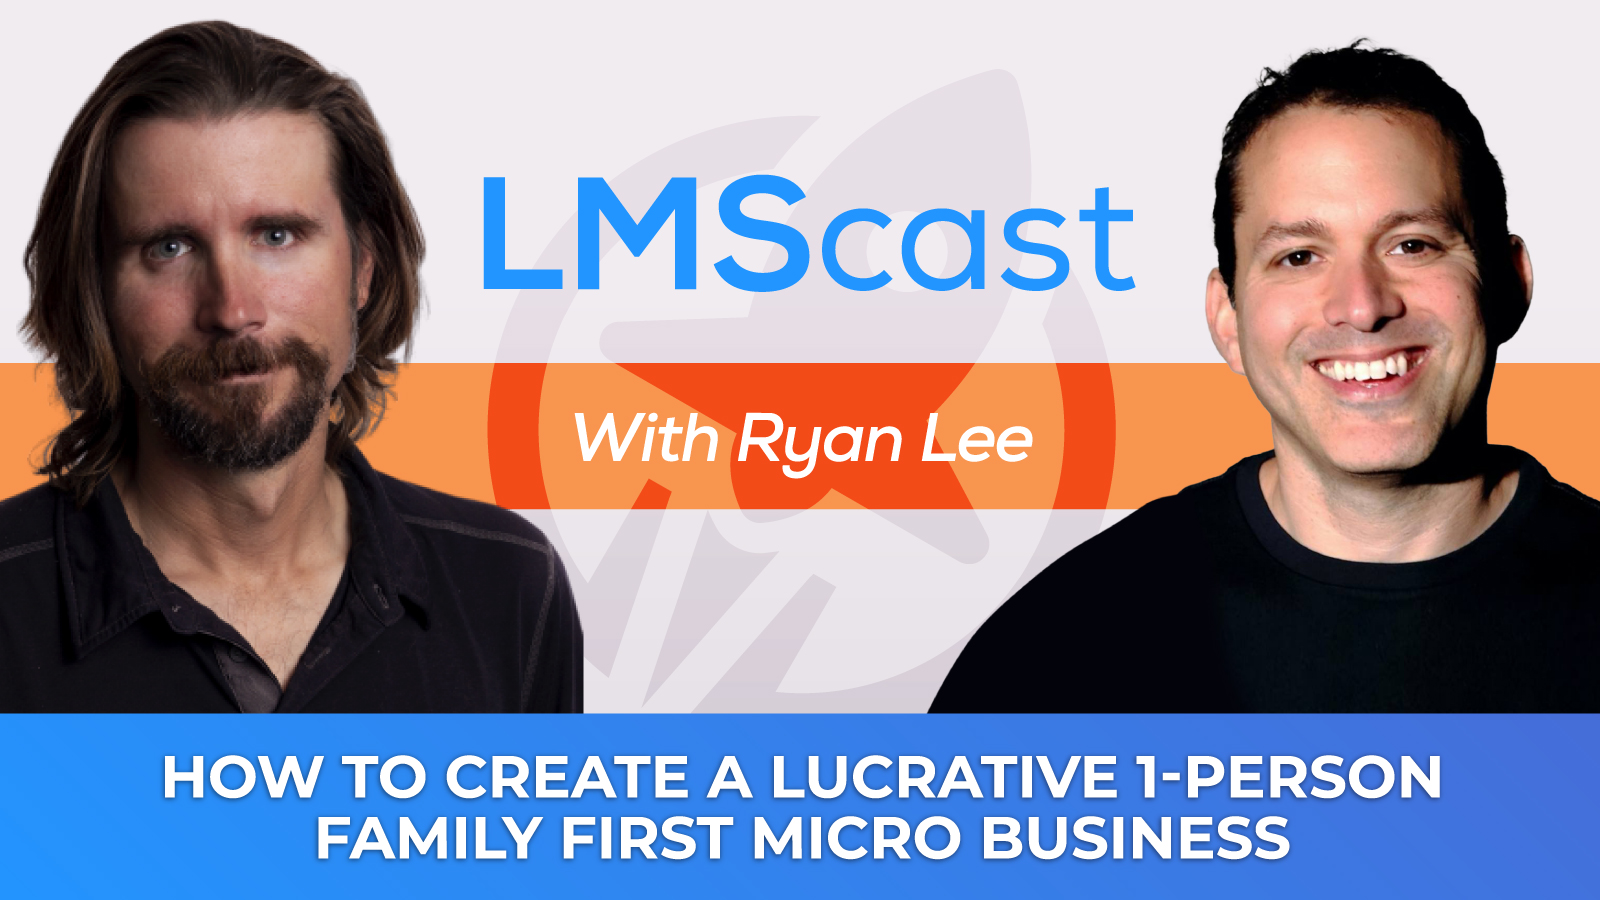 How to Create a Lucrative 1-Person Family First Micro Business with Ryan Lee